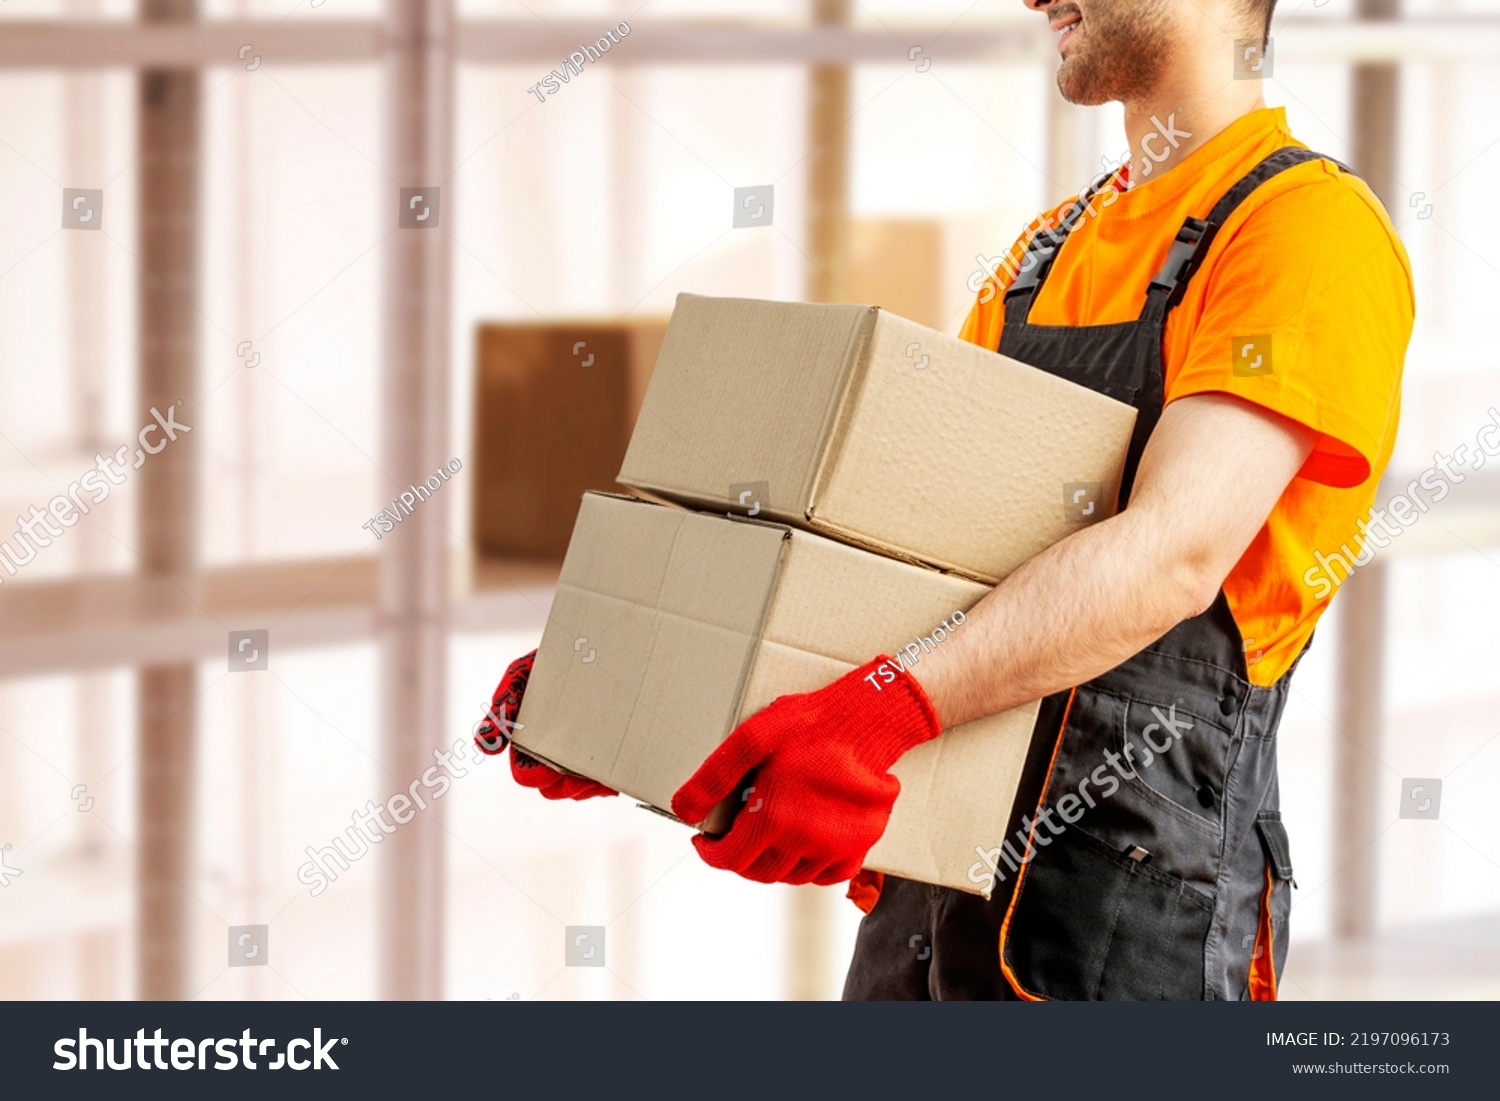 Young man holding cardboard package working in warehouse among racks and shelves. Delivery man with box. Staff laborer, orange uniform cap, t-shirt, coveralls service moving delivering orders goods.  #2197096173